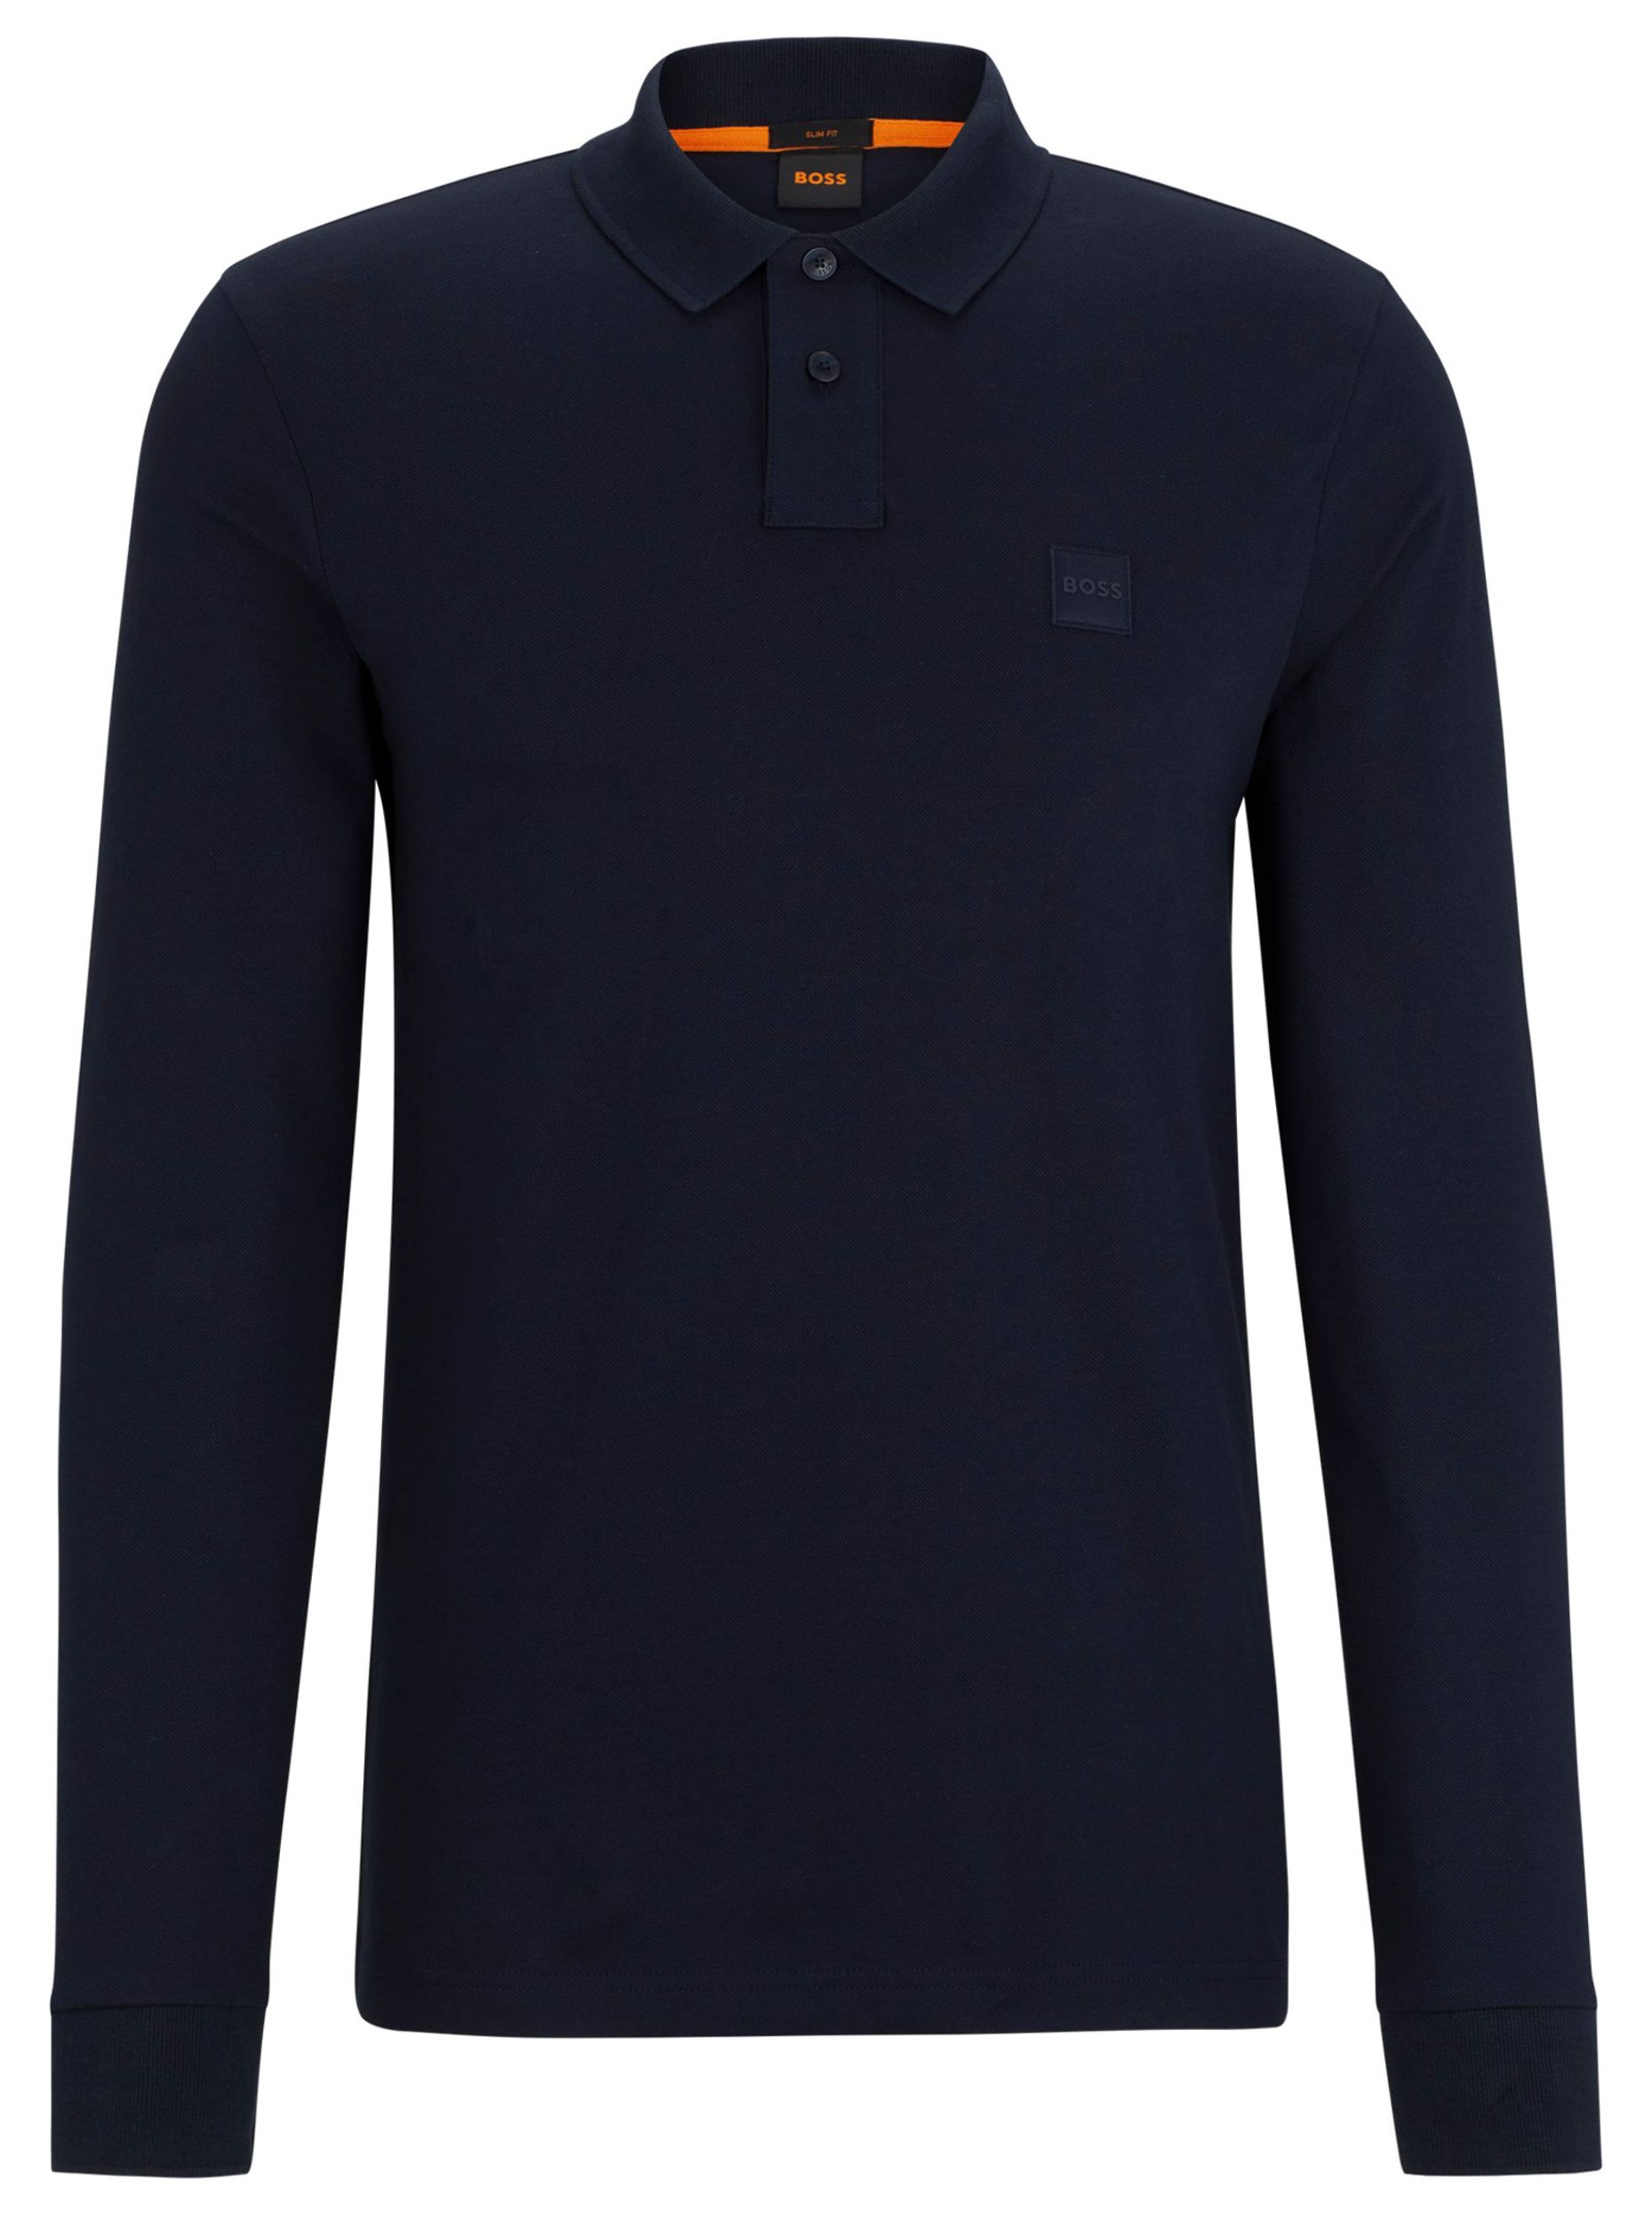 Boss Casual Passerby Polo LM Donker blauw 092739-001-L